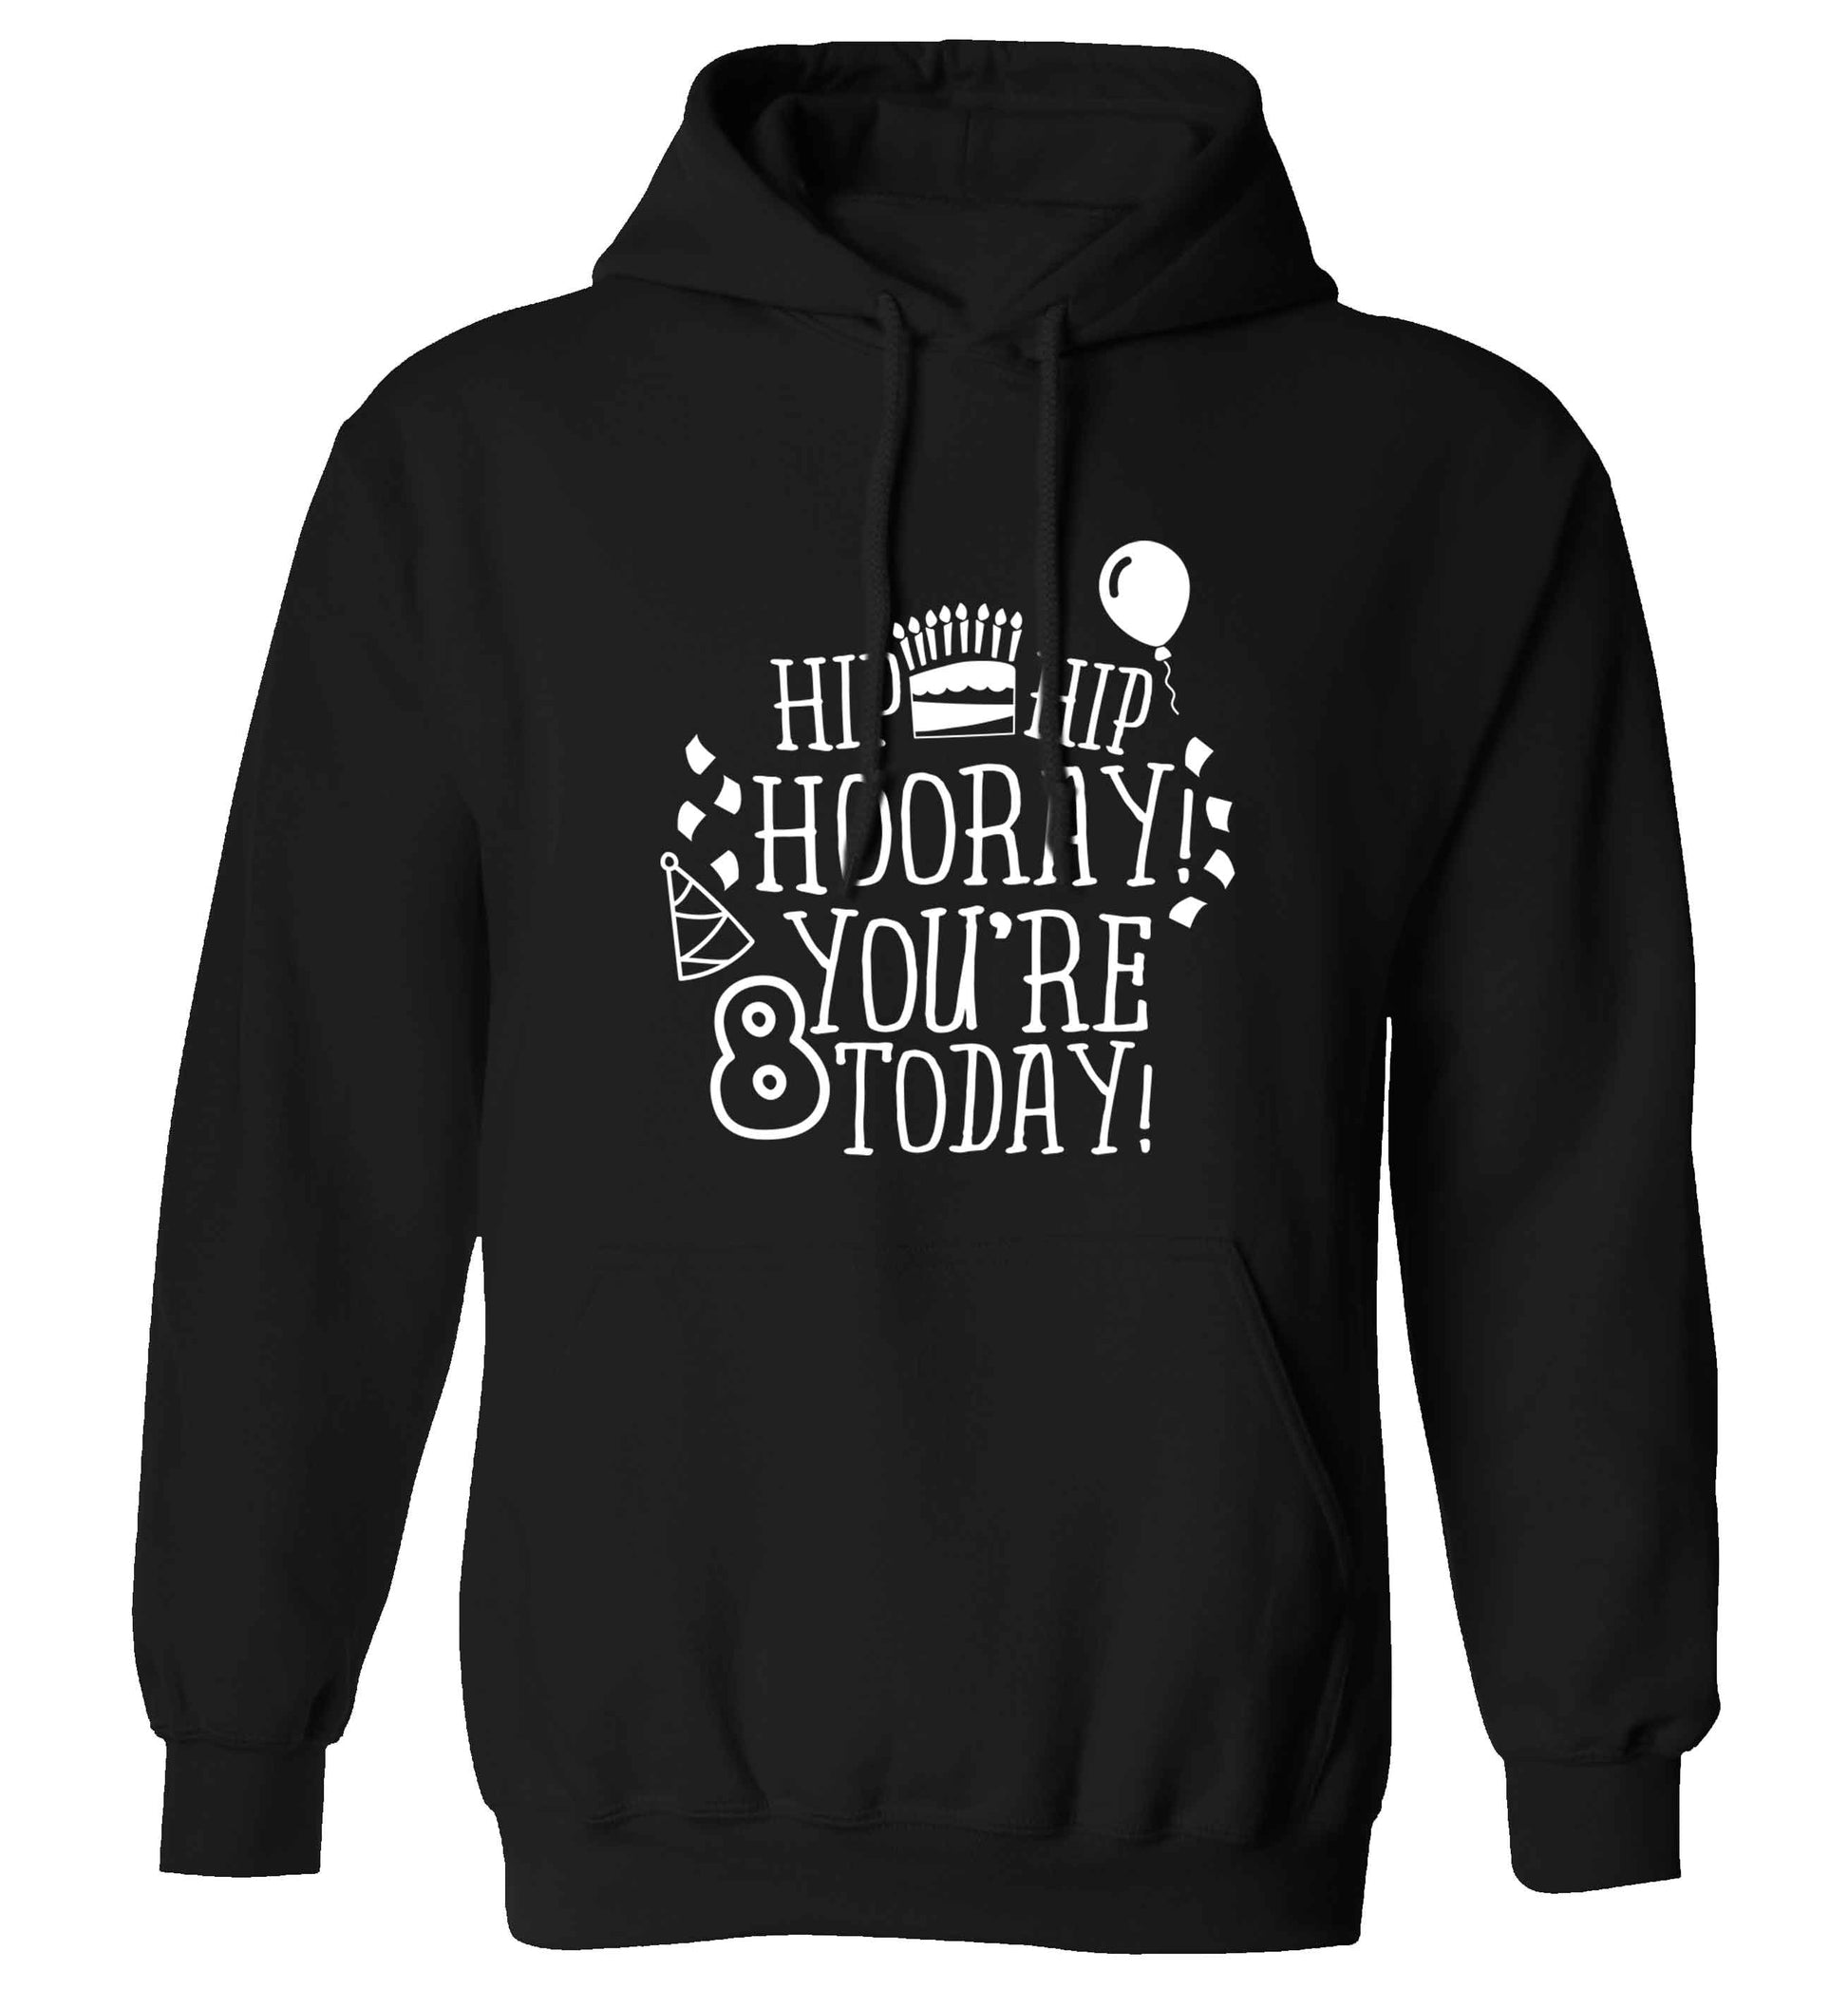 Hip hip hooray you're 8 today! adults unisex black hoodie 2XL